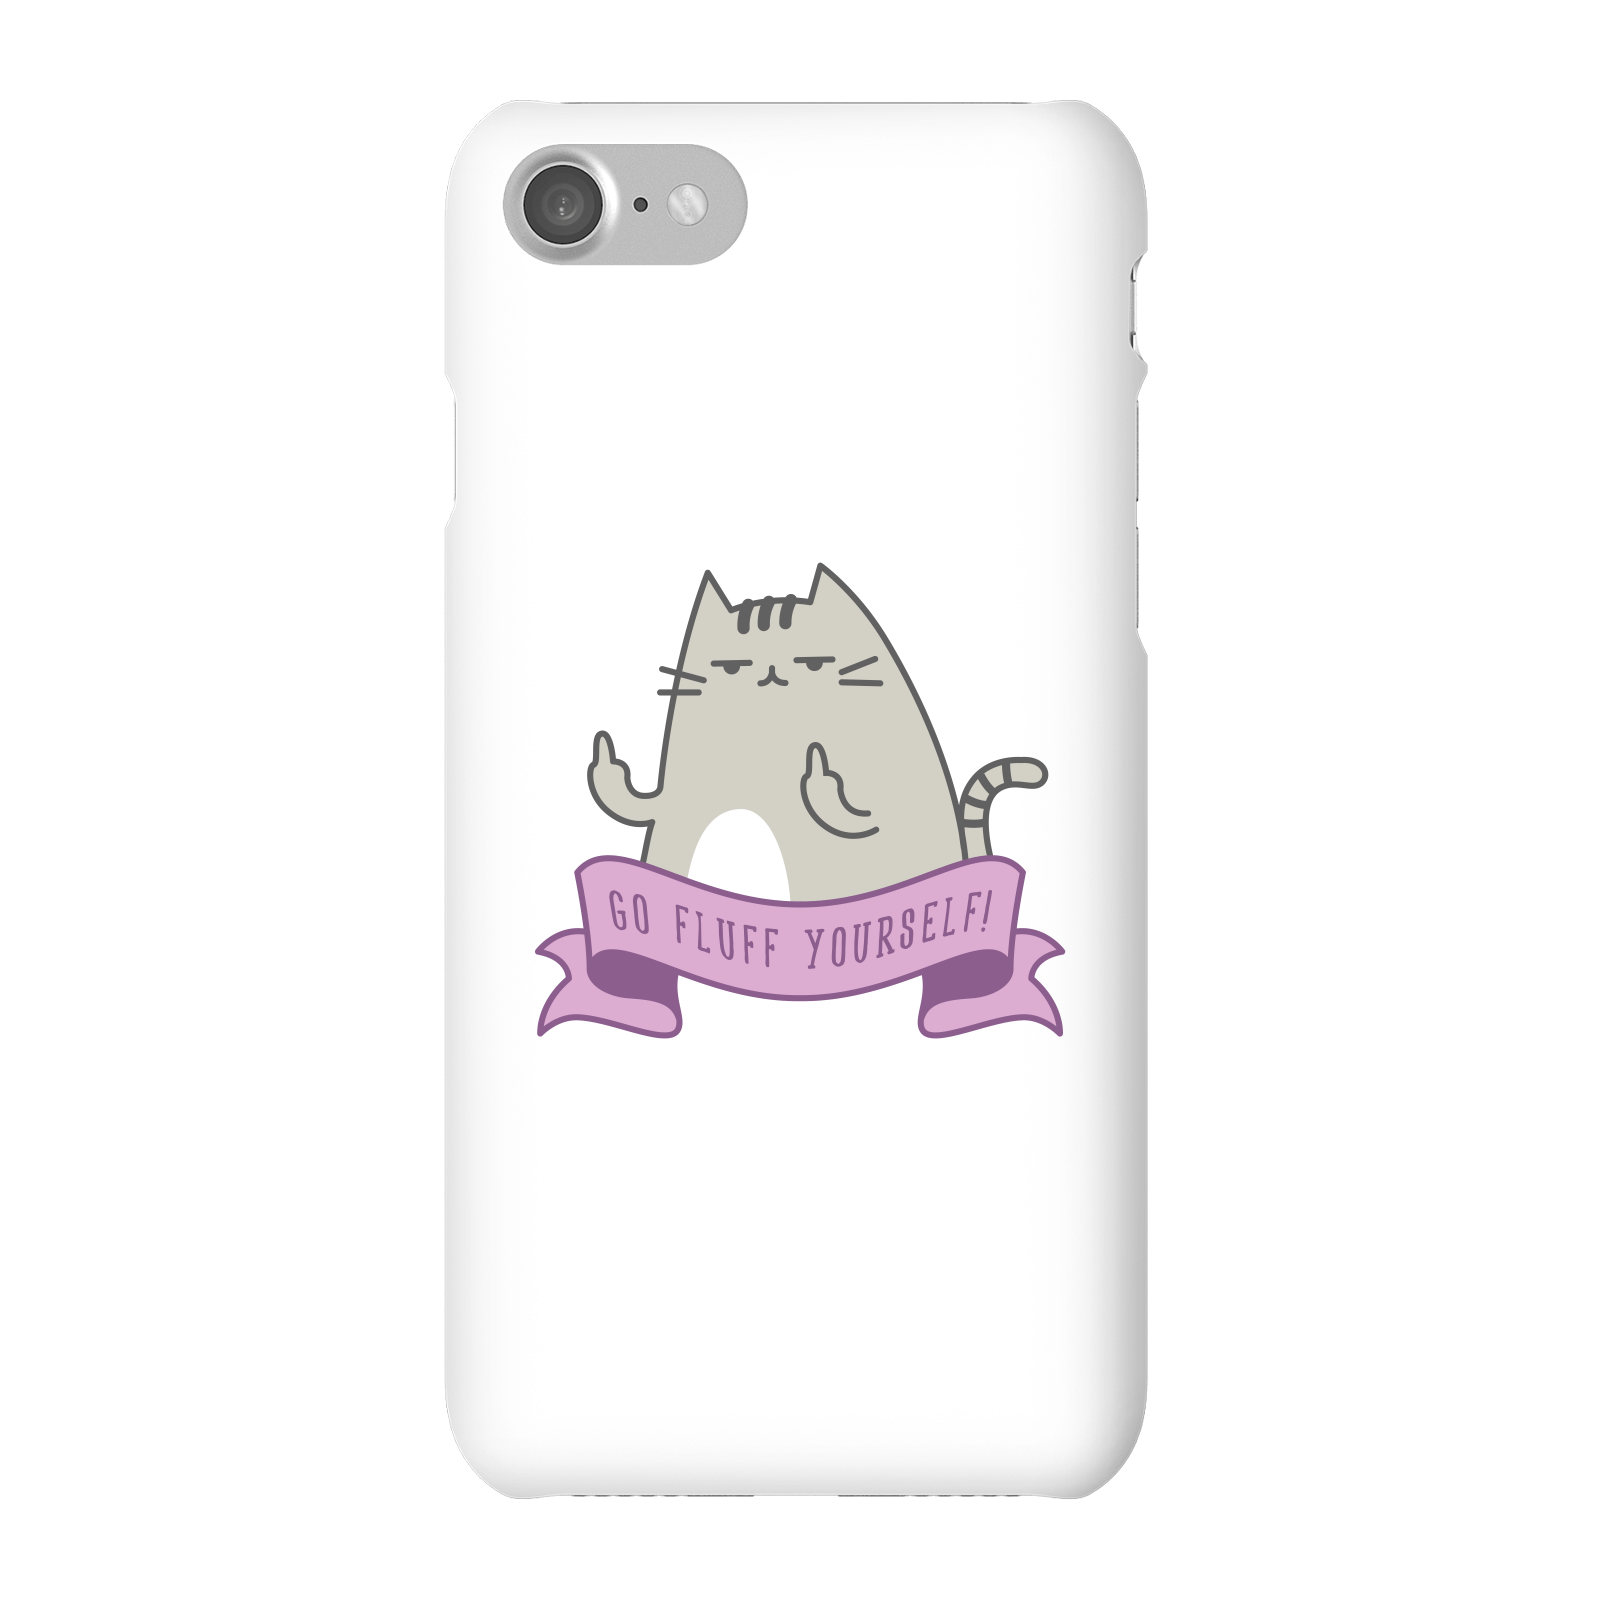 Go Fluff Yourself! Phone Case for iPhone and Android - iPhone 7 - Snap Case - Matte